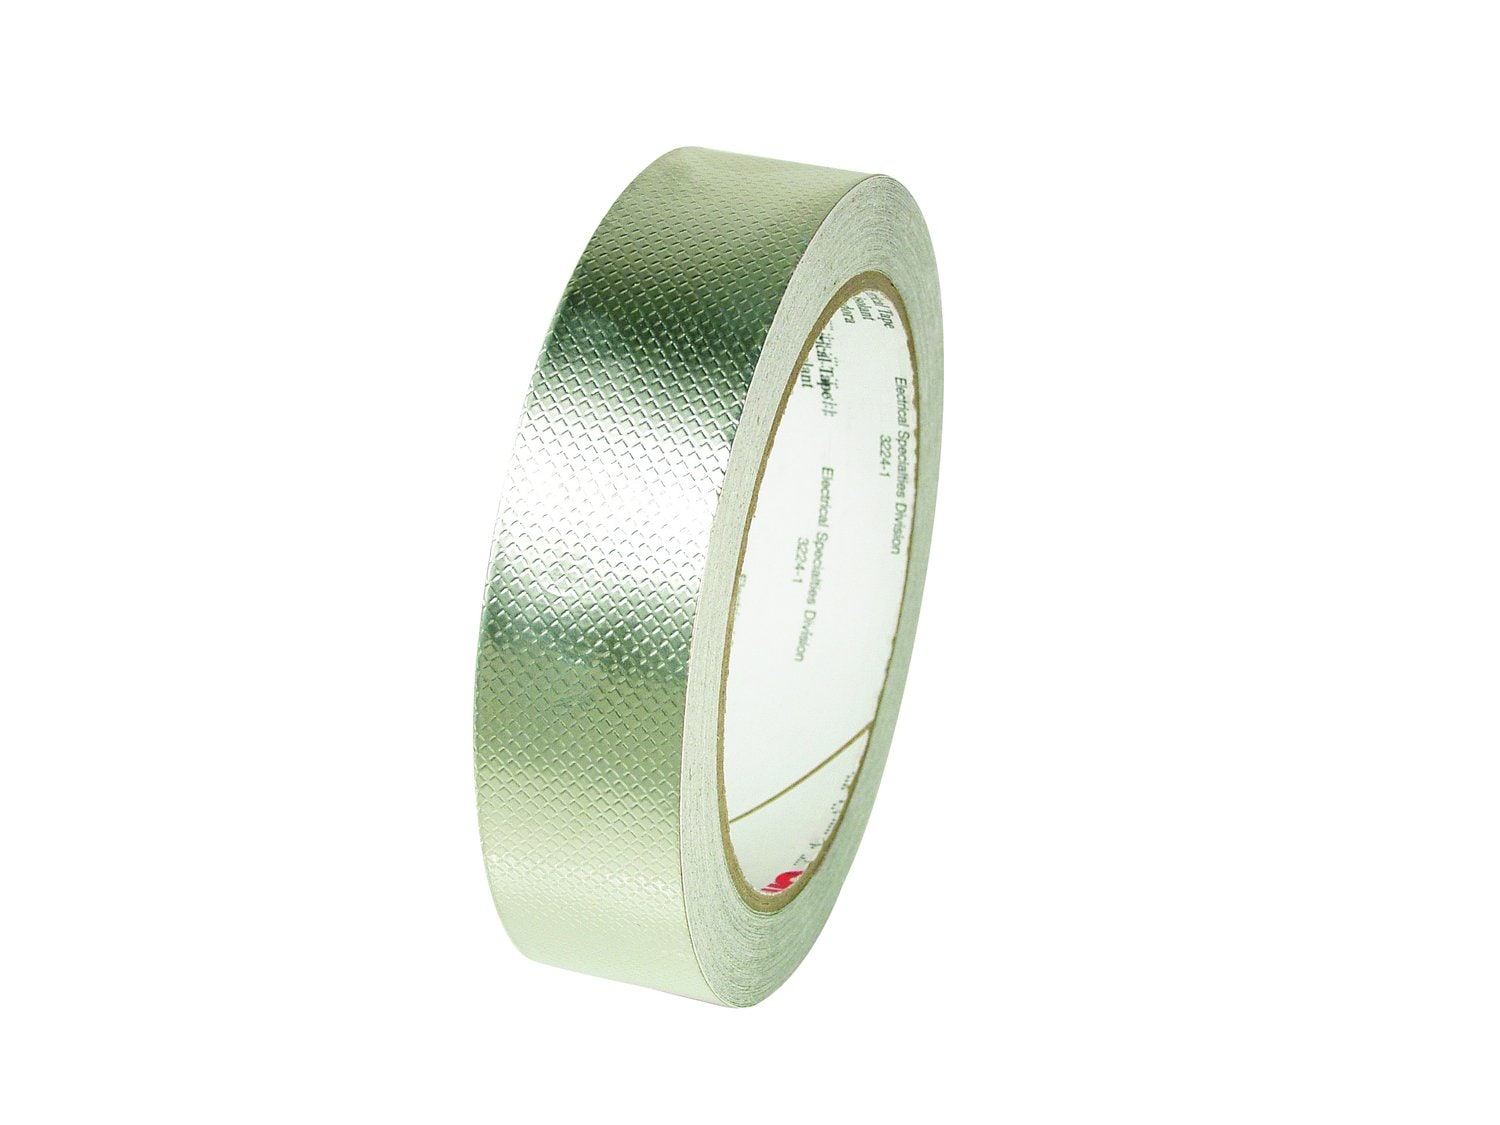 7010395798 - 3M Embossed Tin-Plated Copper Foil EMI Shielding Tape 1345, 1 in x 60
yds, 9 Rolls/Case